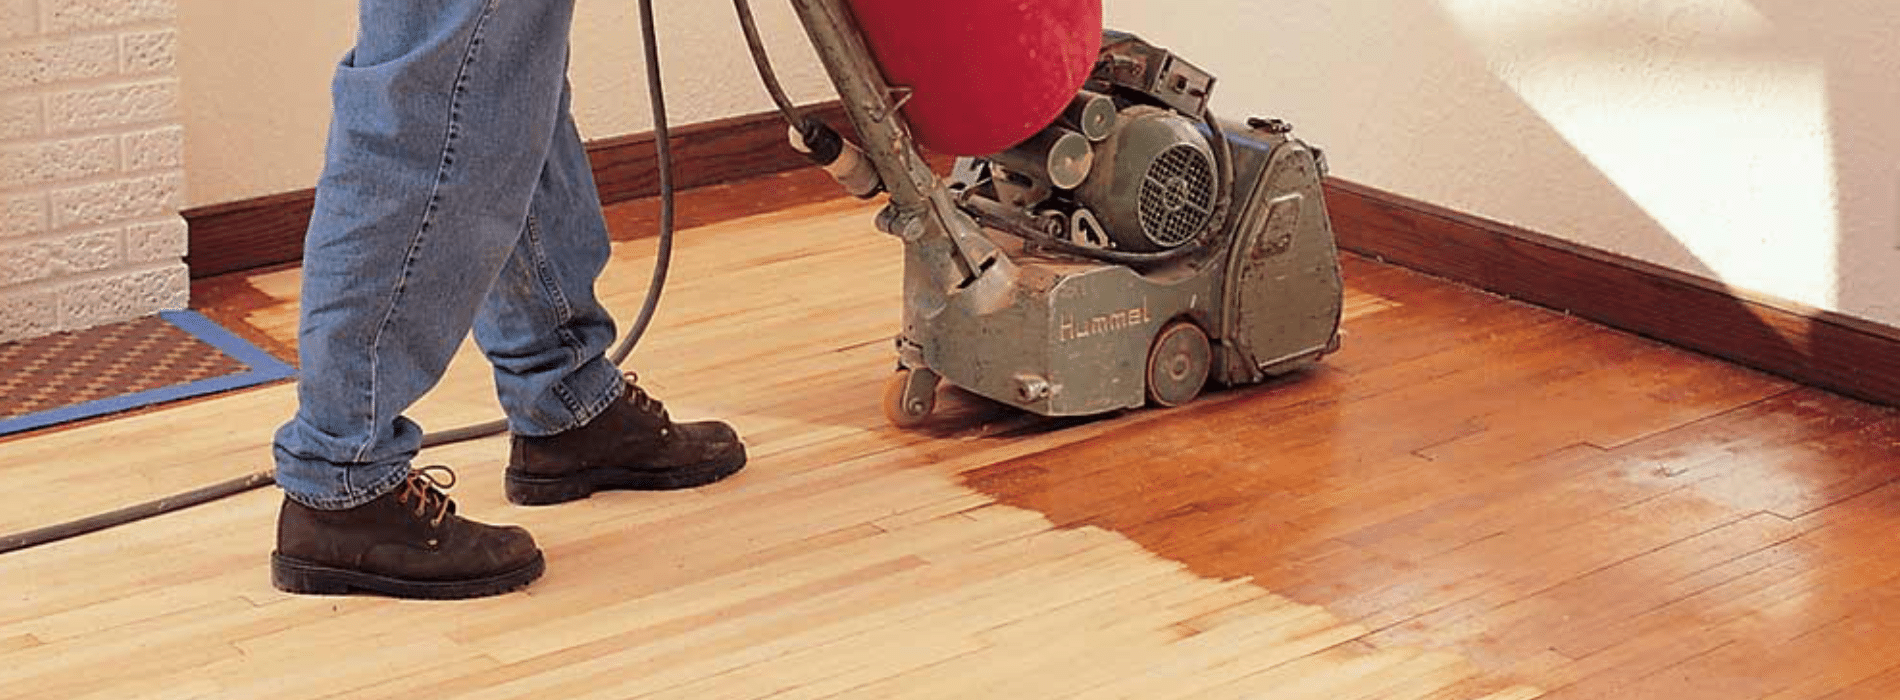 Mr Sander® are using a Bona Scorpion drum sander, measuring 200 mm, with a power output of 1.5 kW. It operates at 240 V and 50 Hz frequency in Chelsea, SW10. A dust extraction system with a HEPA filter ensures a clean and efficient sanding process for the herringbone floor. 